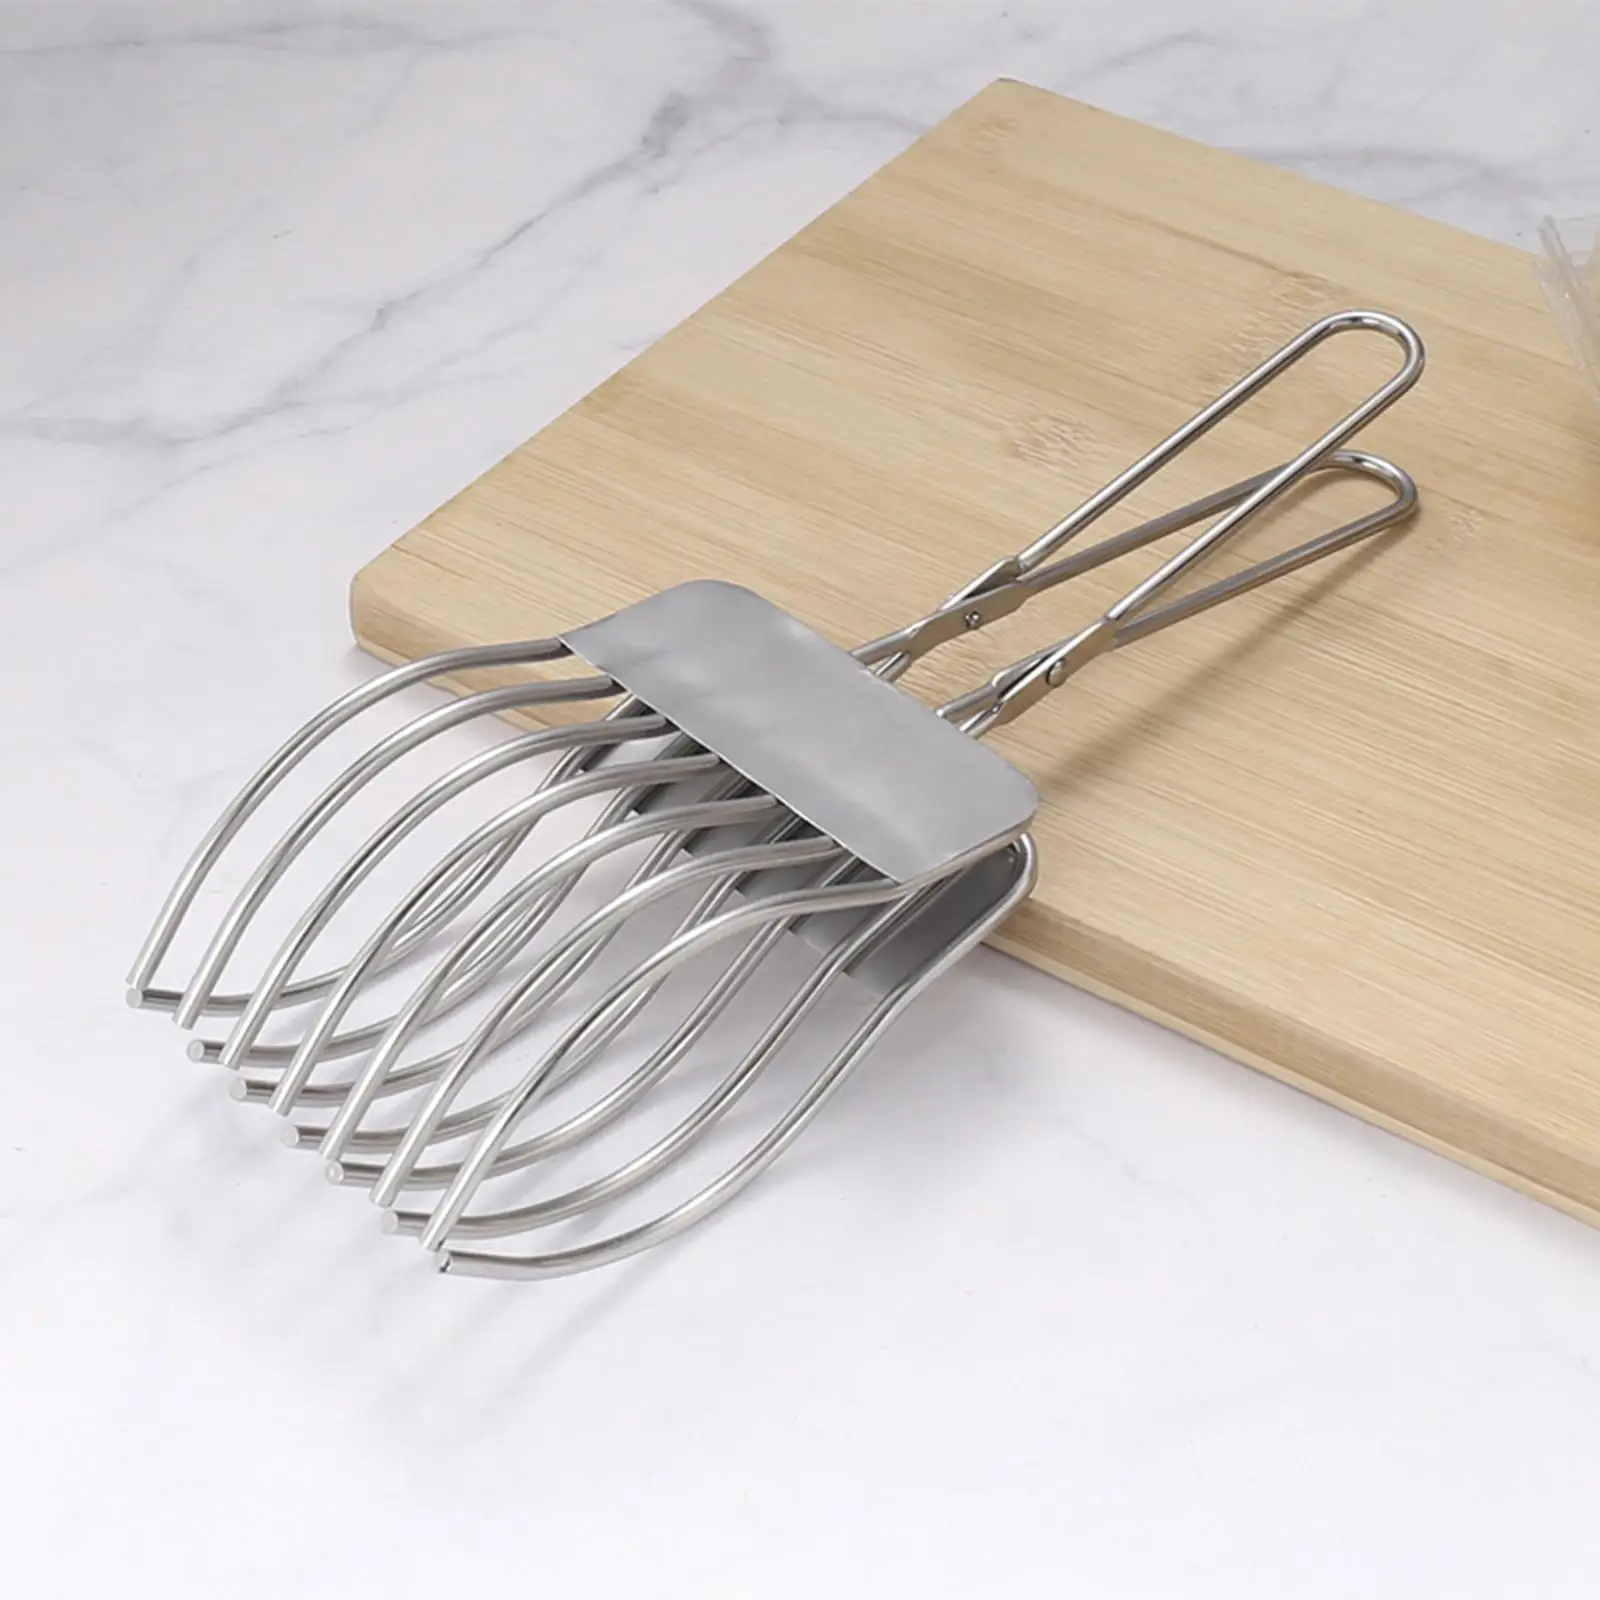 Slicing Kitchen Tools Gadget Bread Holder Buffet Tongs Vegetable Slicer Roast Beef Tongs for Slicing Vegetable